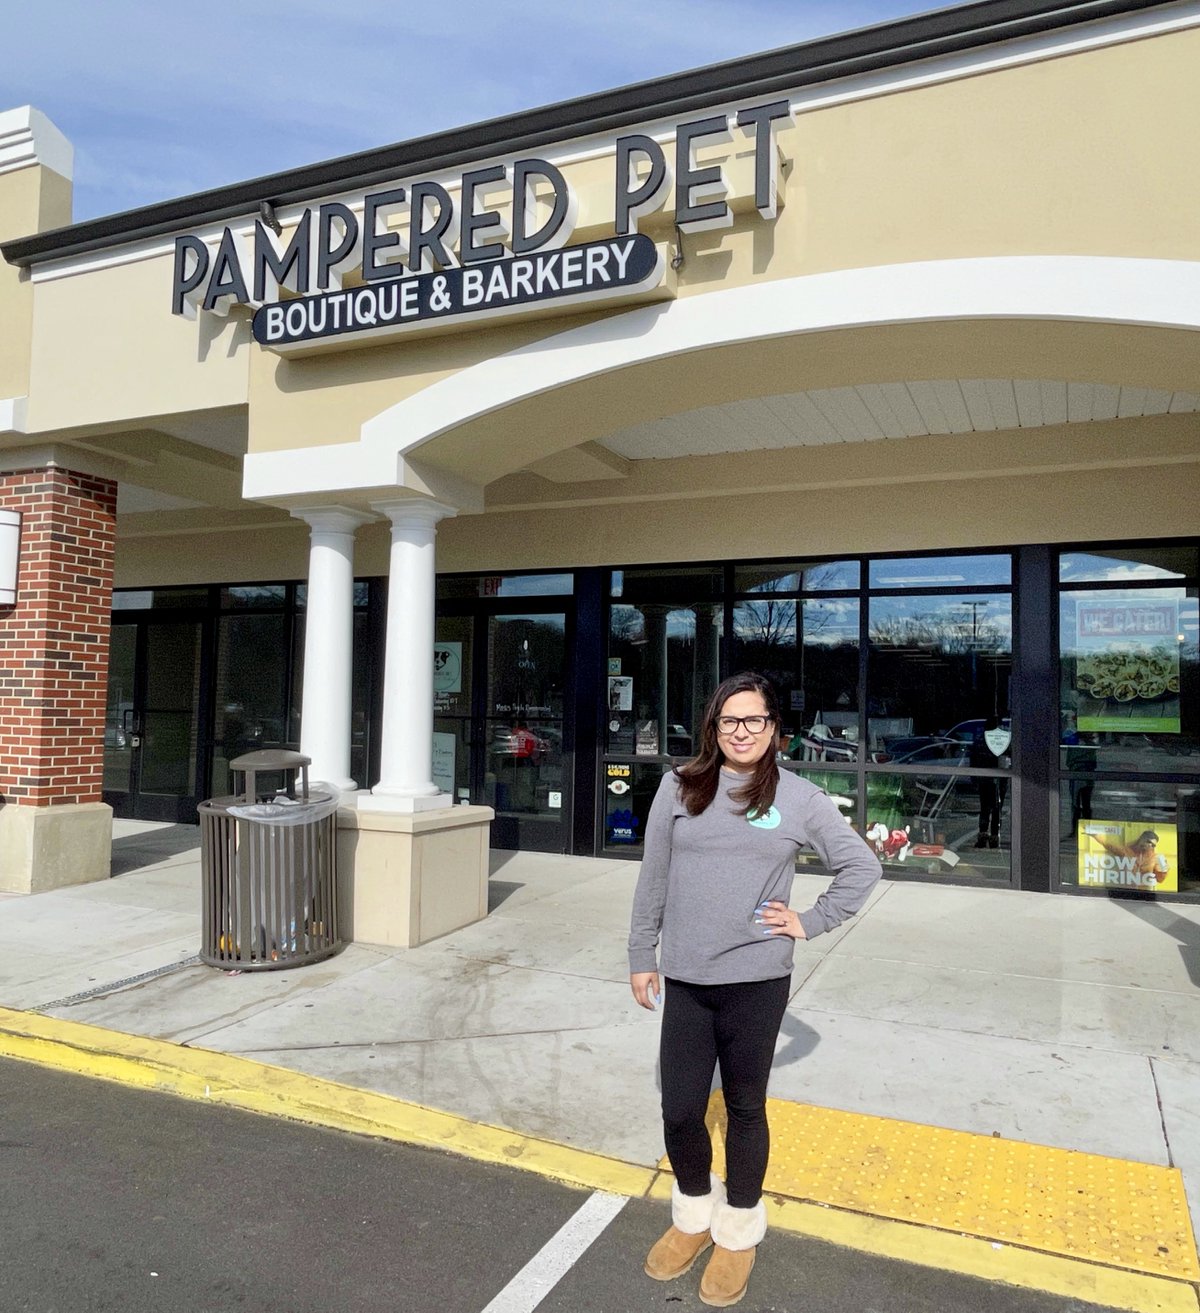 Belle View’s Pampered Pet Boutique and Barkery is More Than Just a Pet Store